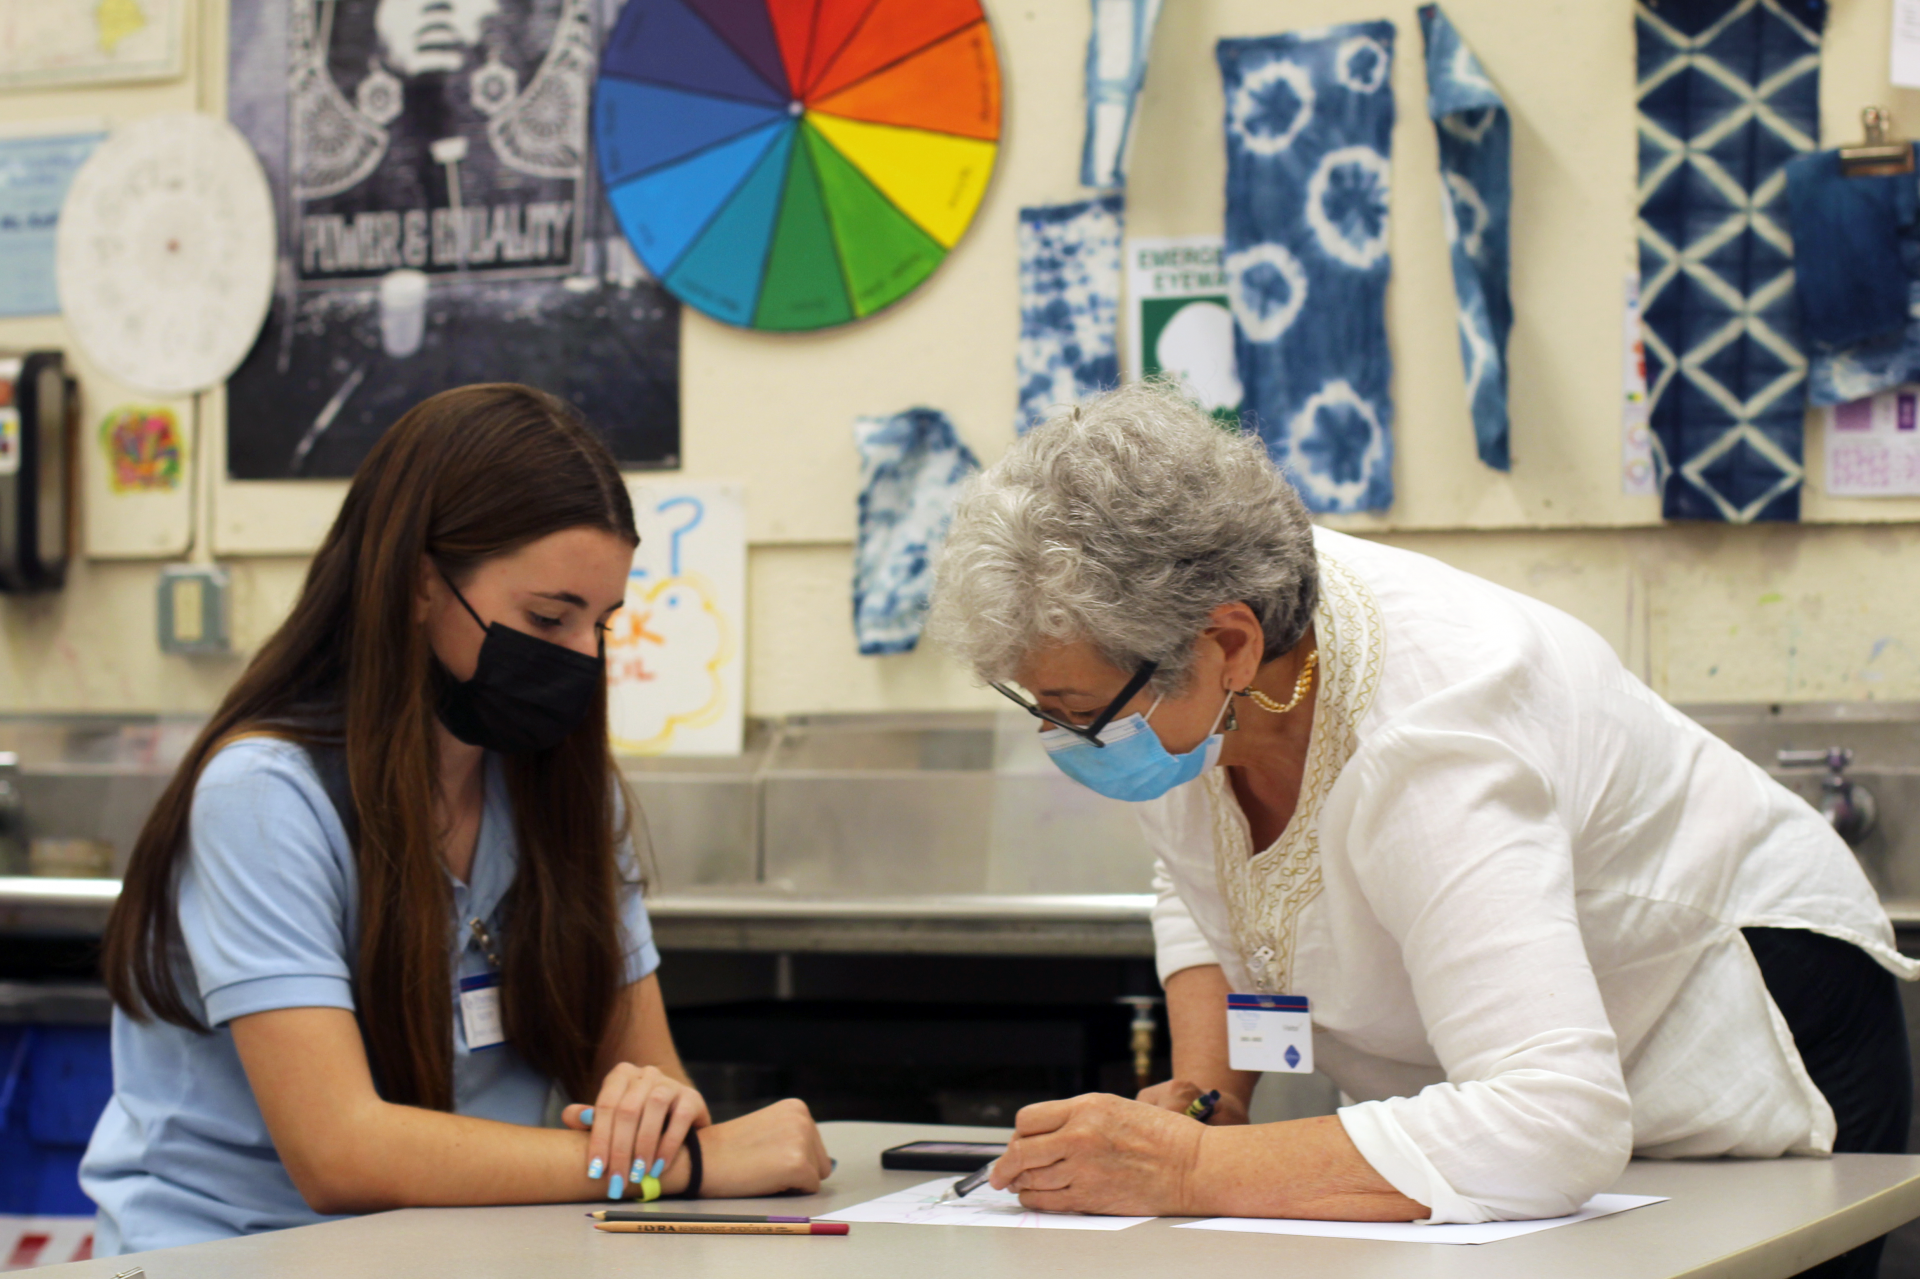 Multimedia Artist Tina Cintron works on drawing projects with students